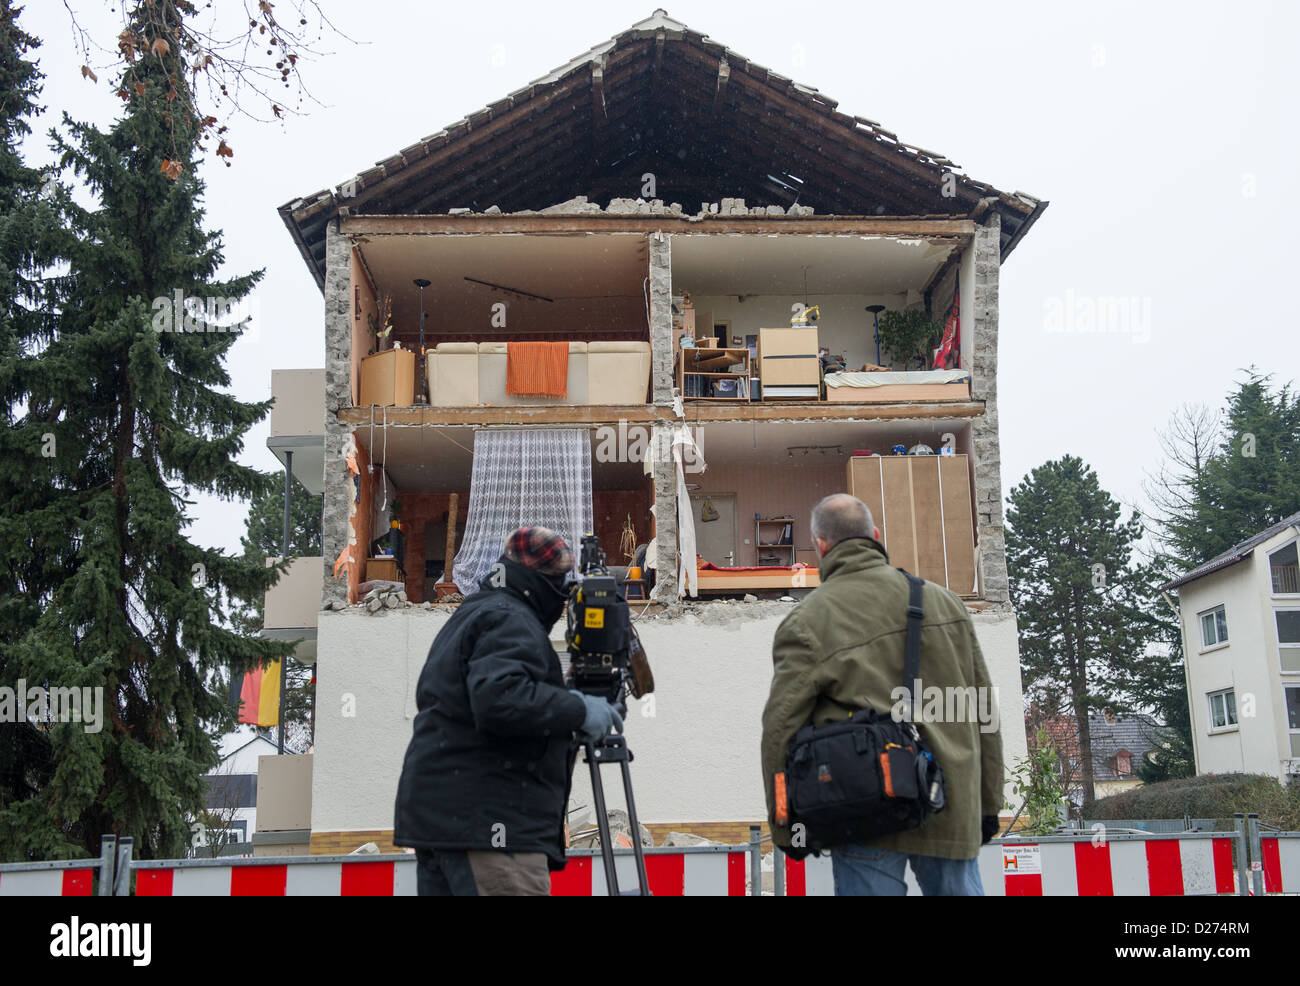 A television crew films an apartment building whose facade has collapsed in Frankenthal, Germany, 15 January 2013. The cause of the complete collapse of the facade is unknown at the moment, but the residents were not injured. Photo: UWE ANSPACH Stock Photo